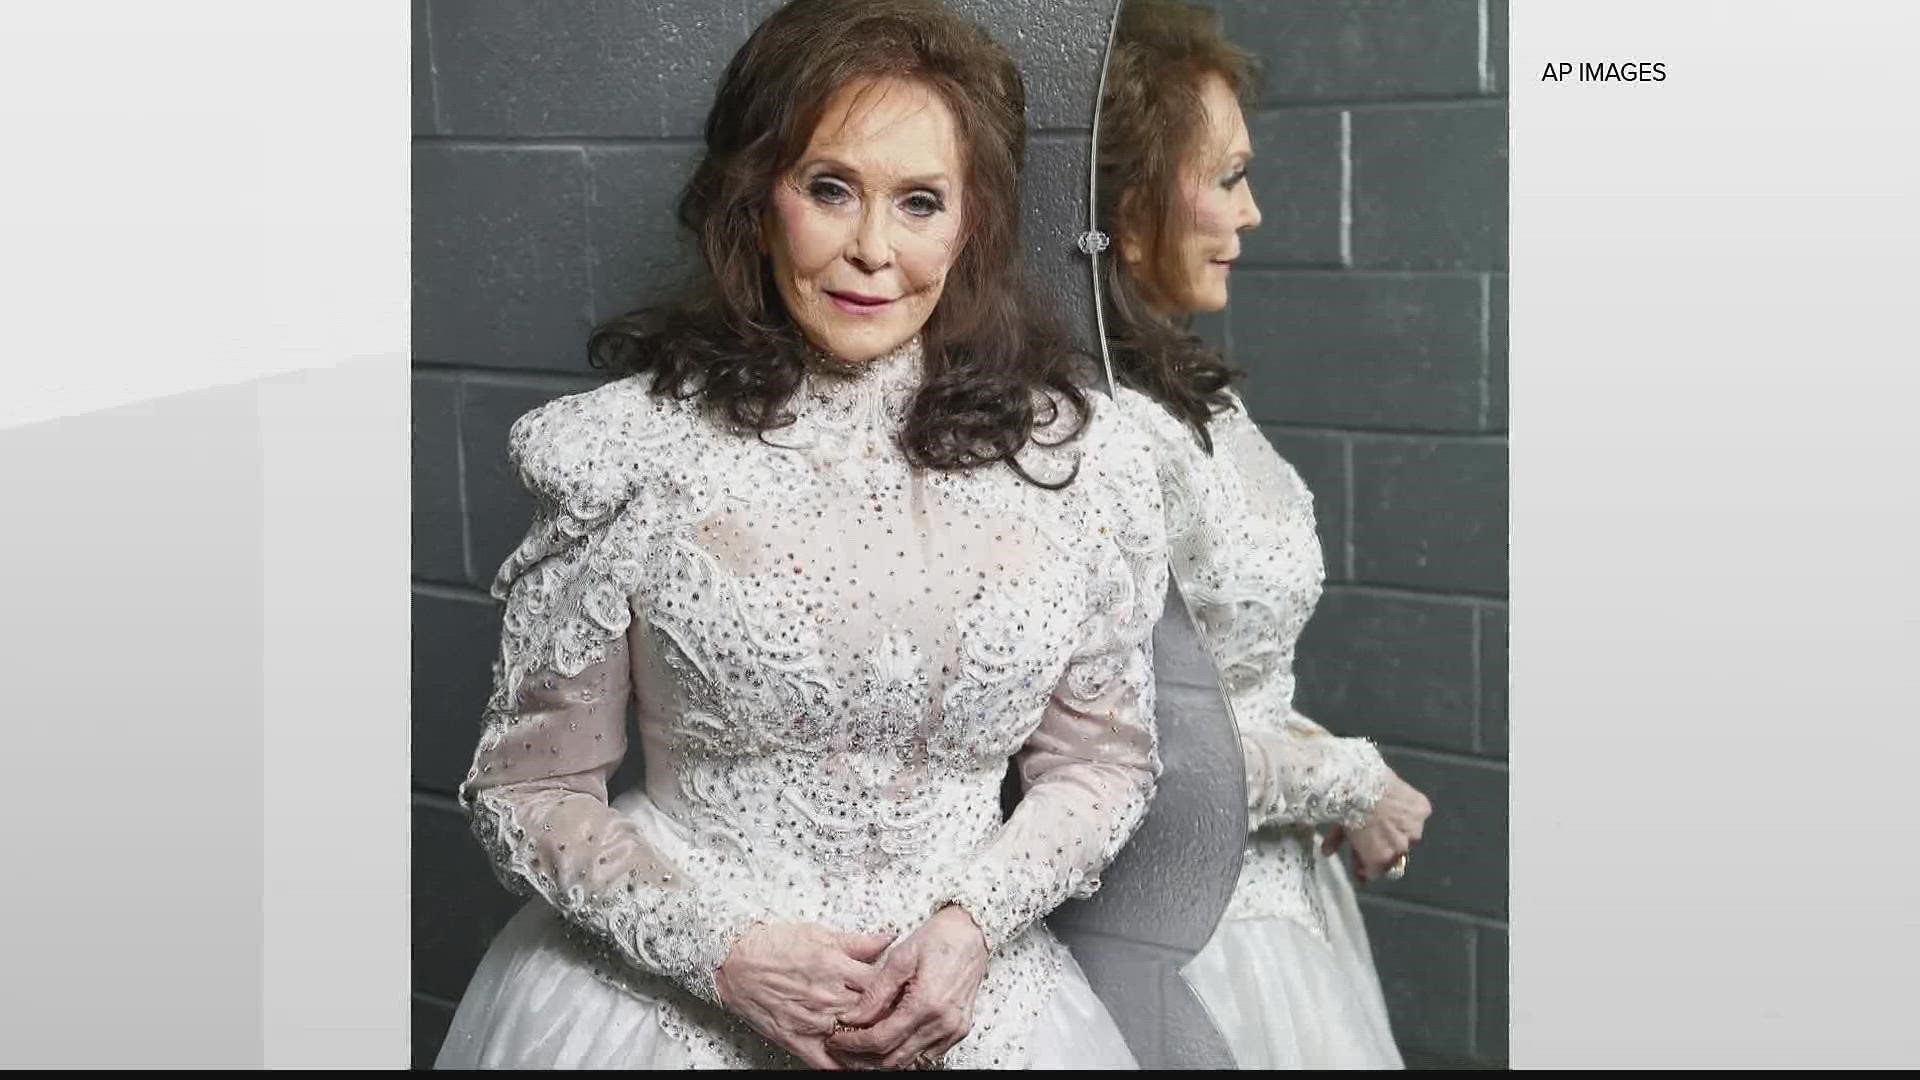 The Kentucky coal miner's daughter died today at her home in Mills, Tennessee.